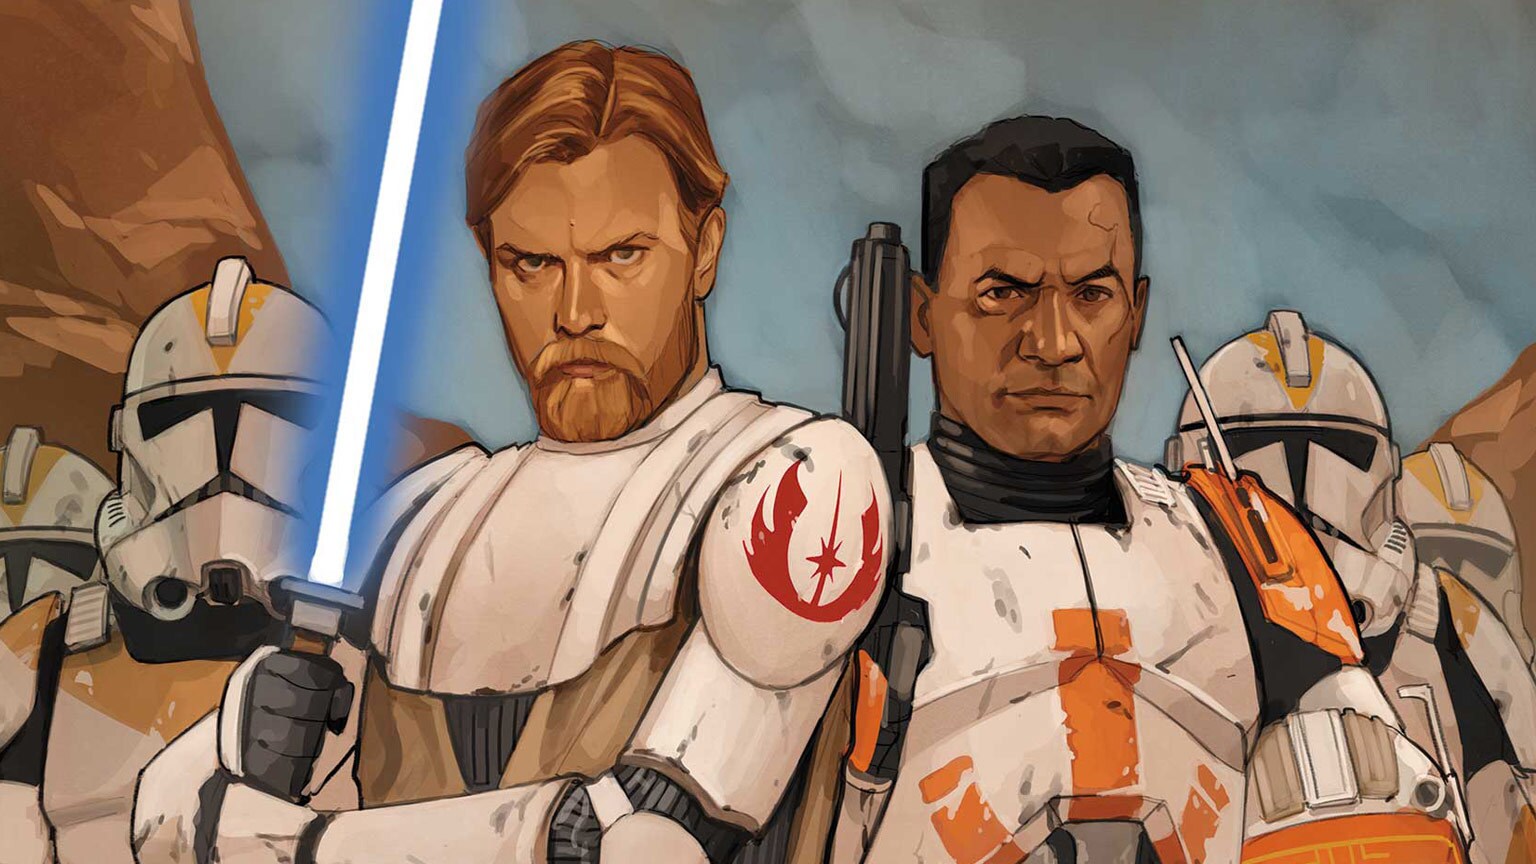 General Obi-Wan Kenobi Reflects on the Clone Wars and More from Marvel's July 2022 Star Wars Comics - Exclusive Preview